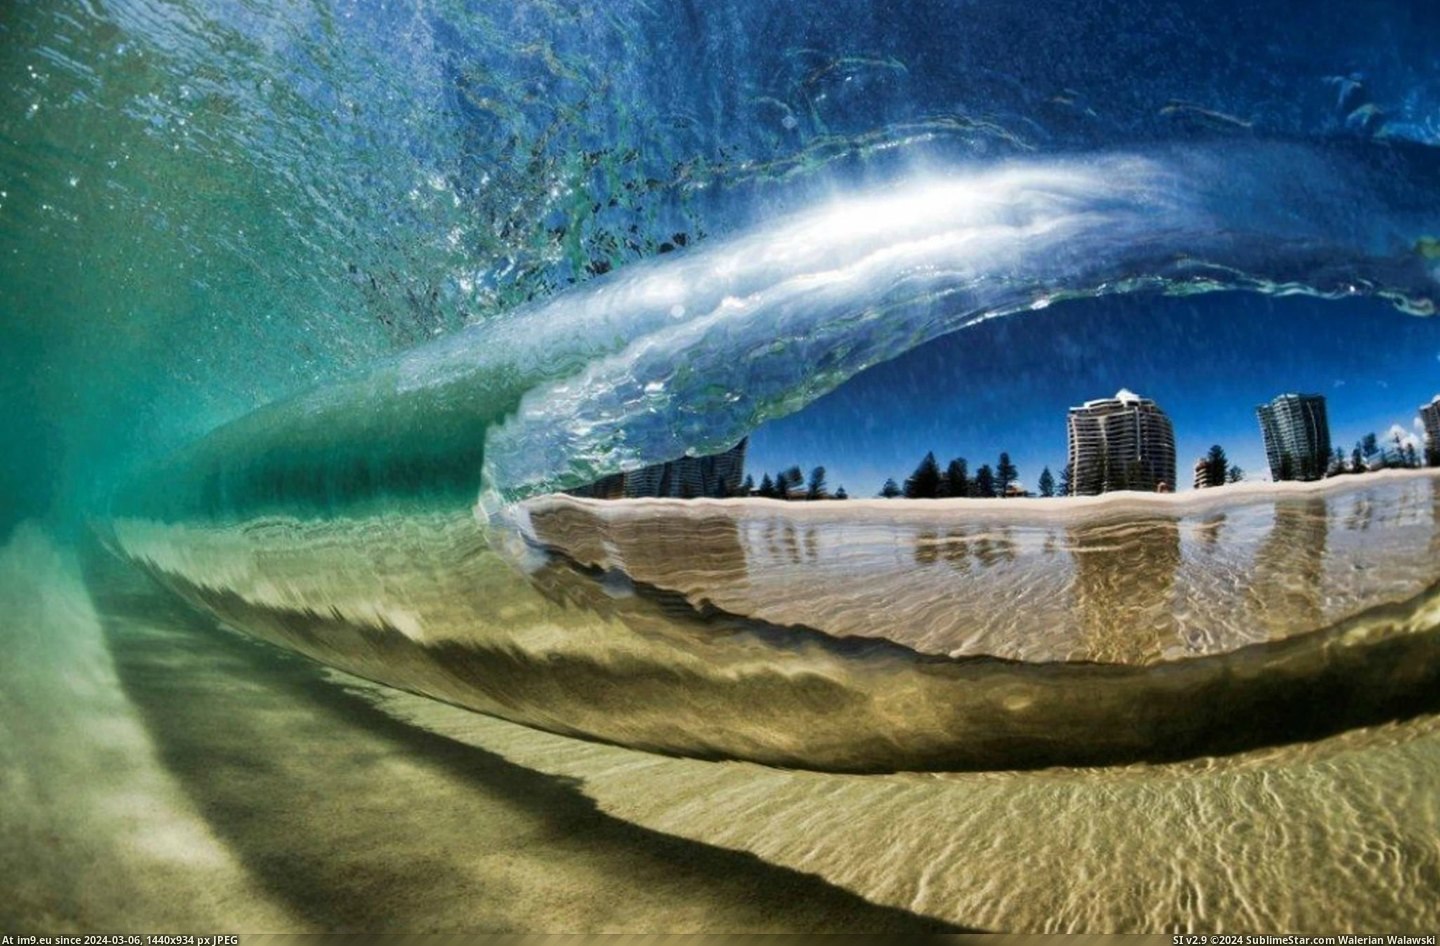  #Wave  [Pics] A view from under the wave. Pic. (Bild von album My r/PICS favs))